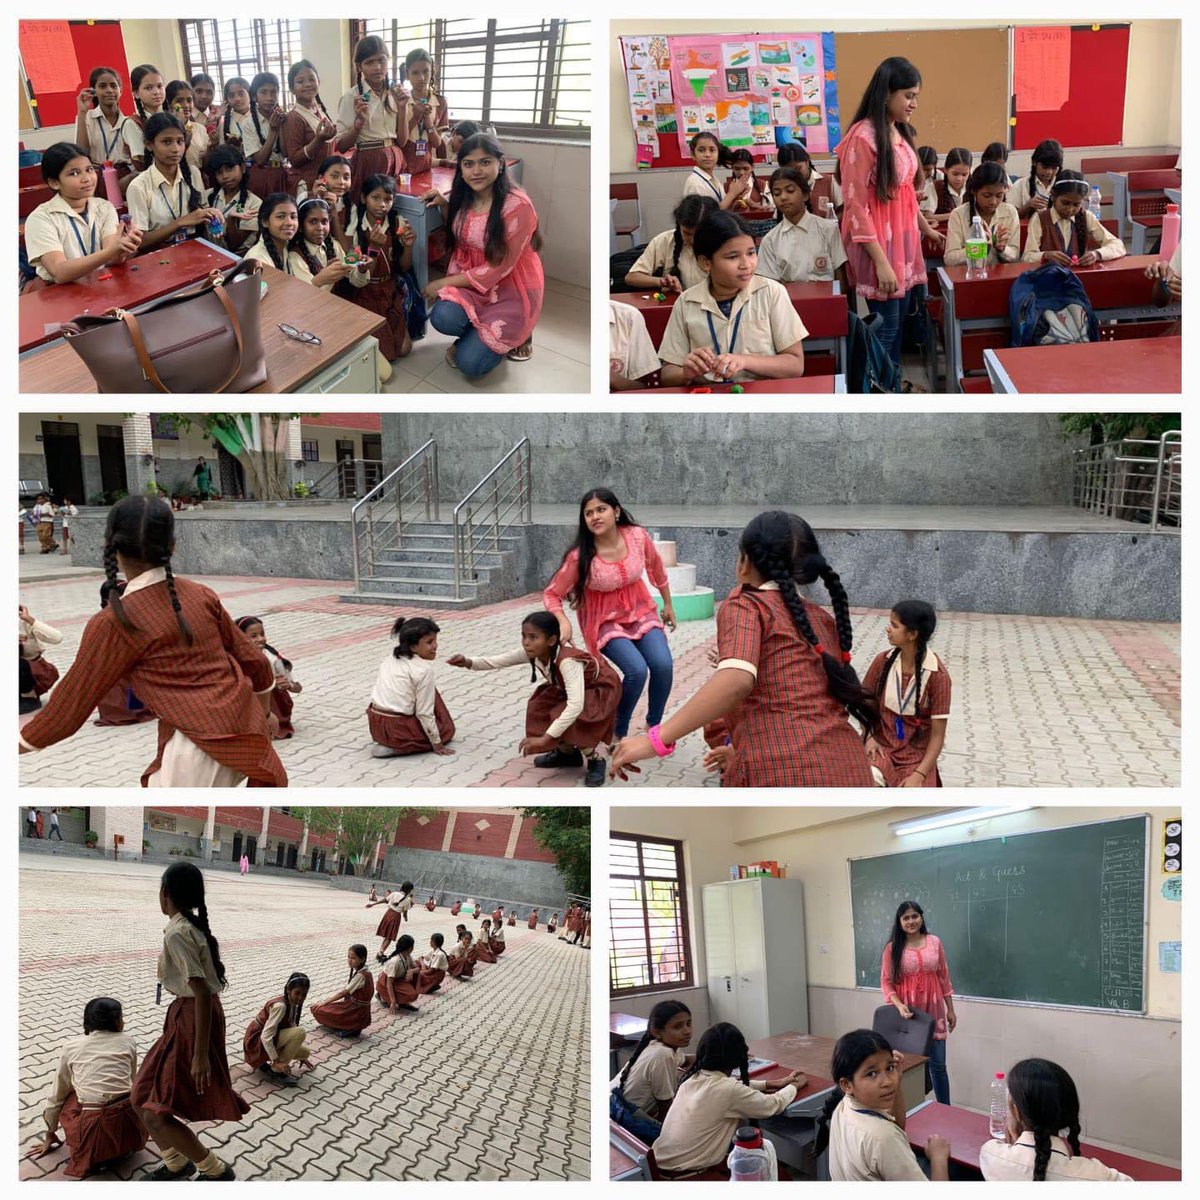 Implementing 'Learning By Doing', @SCERT2021 B. Ed. Trainees during PSE II, provided a fun learning environment through storytelling, puppetry, outdoor activities etc. for holistic development of students to ensure positive learning outcomes. @gupta_iitdelhi @Dir_Education